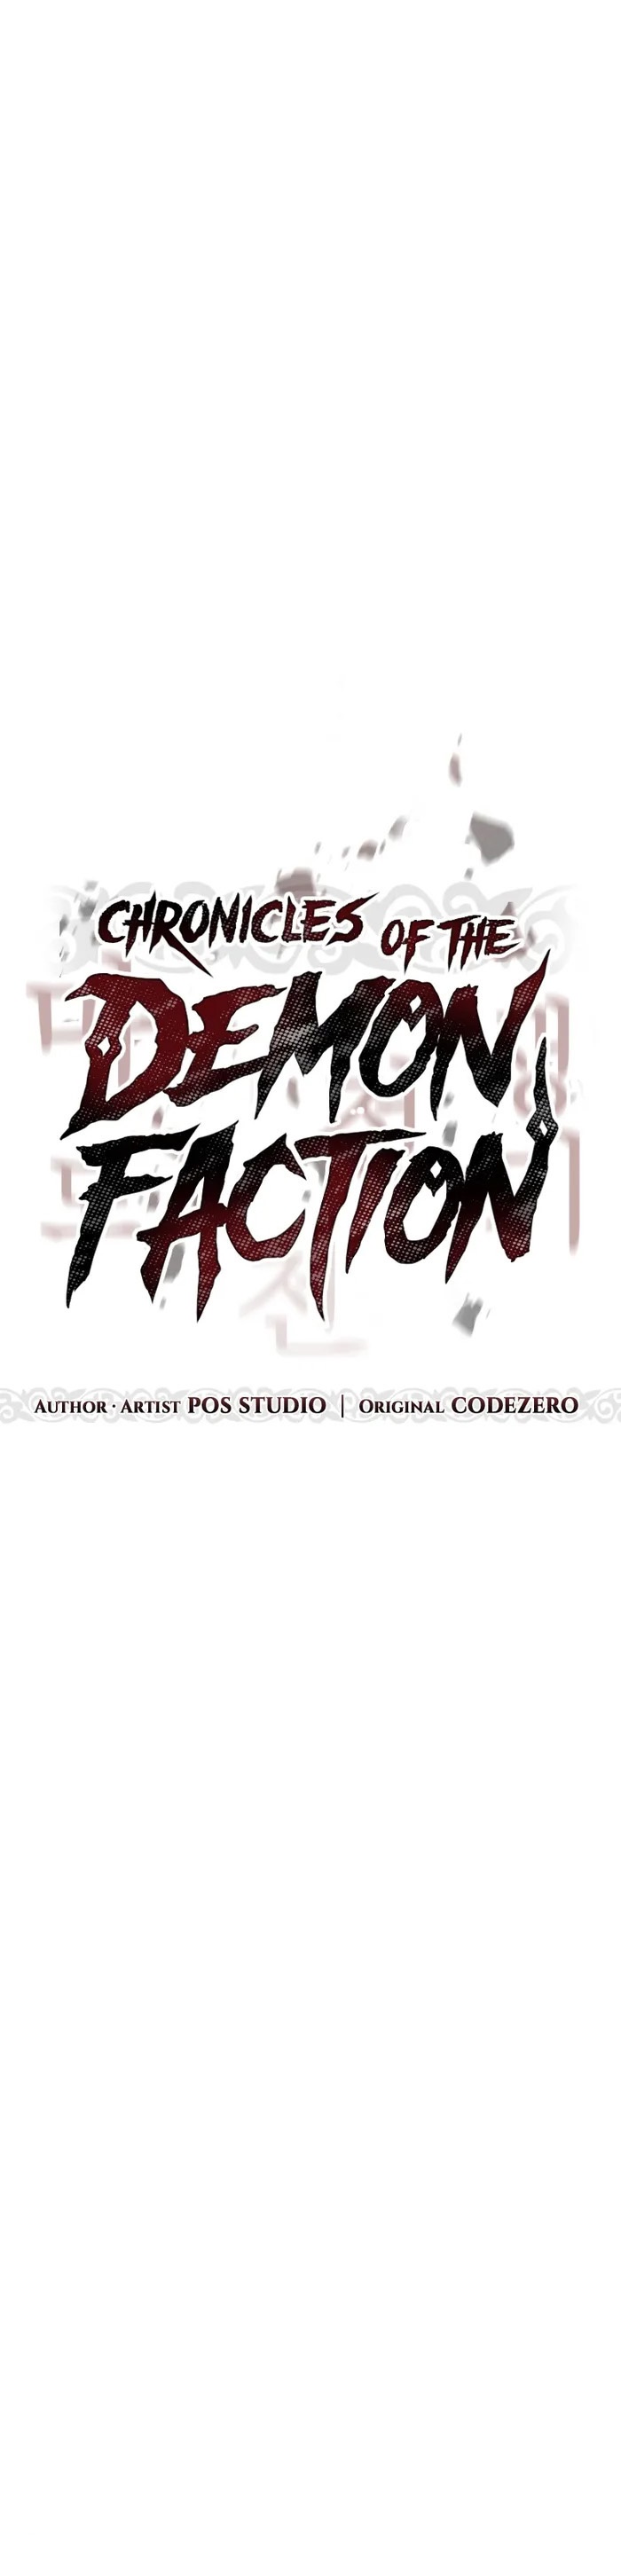 Chronicles of the Demon Faction 42 (7) 004